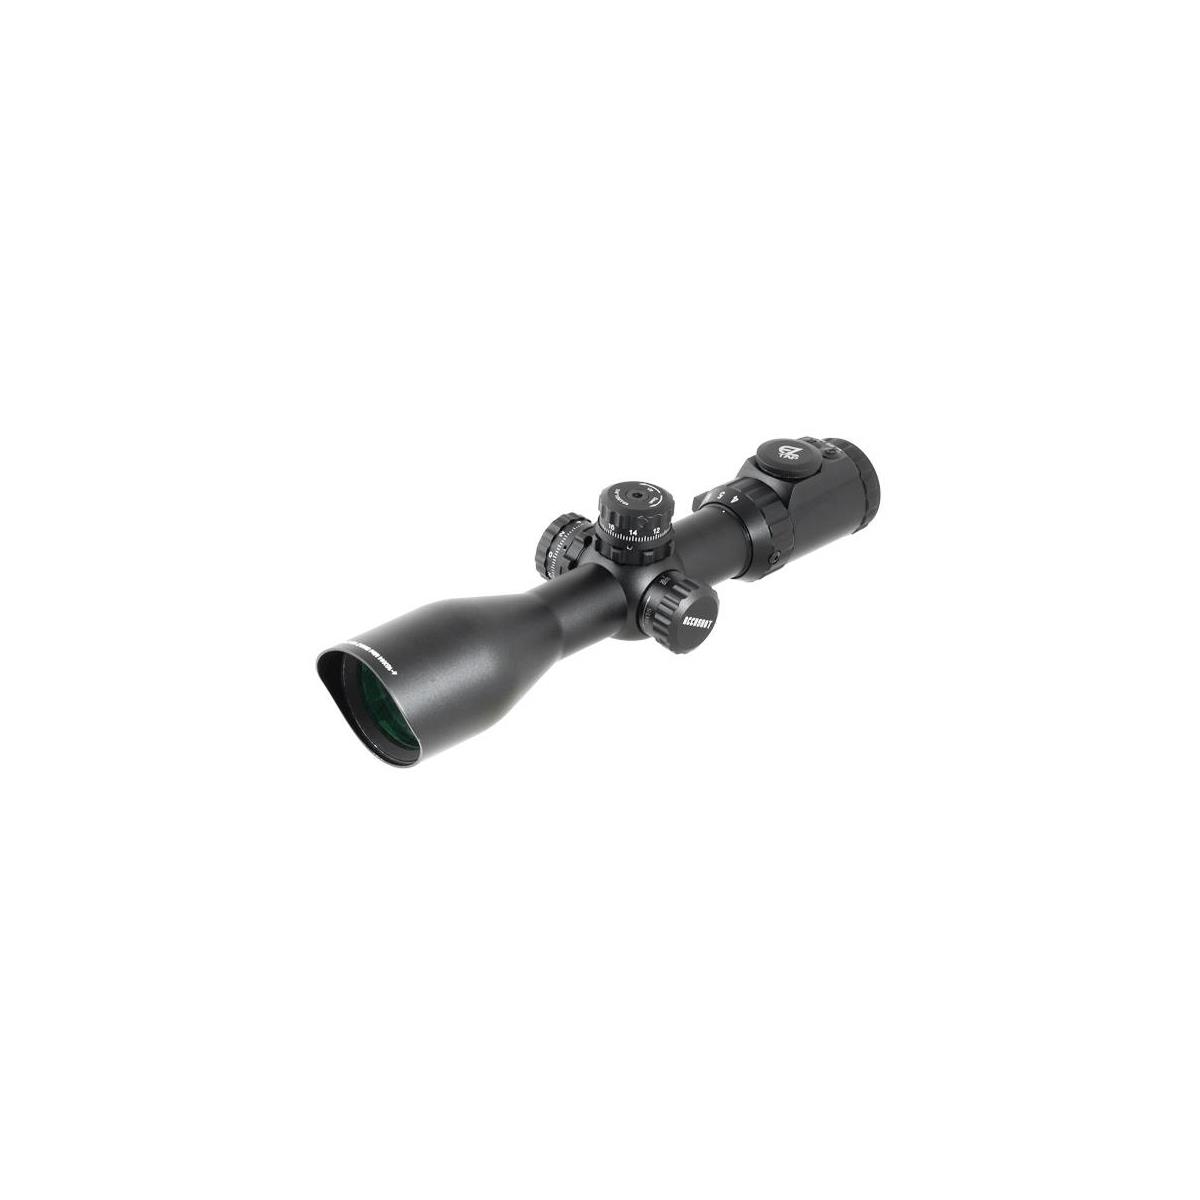 Photos - Sight Leapers UTG 4-16x44 Scope with Rings SCP3-UM416AOIEW 